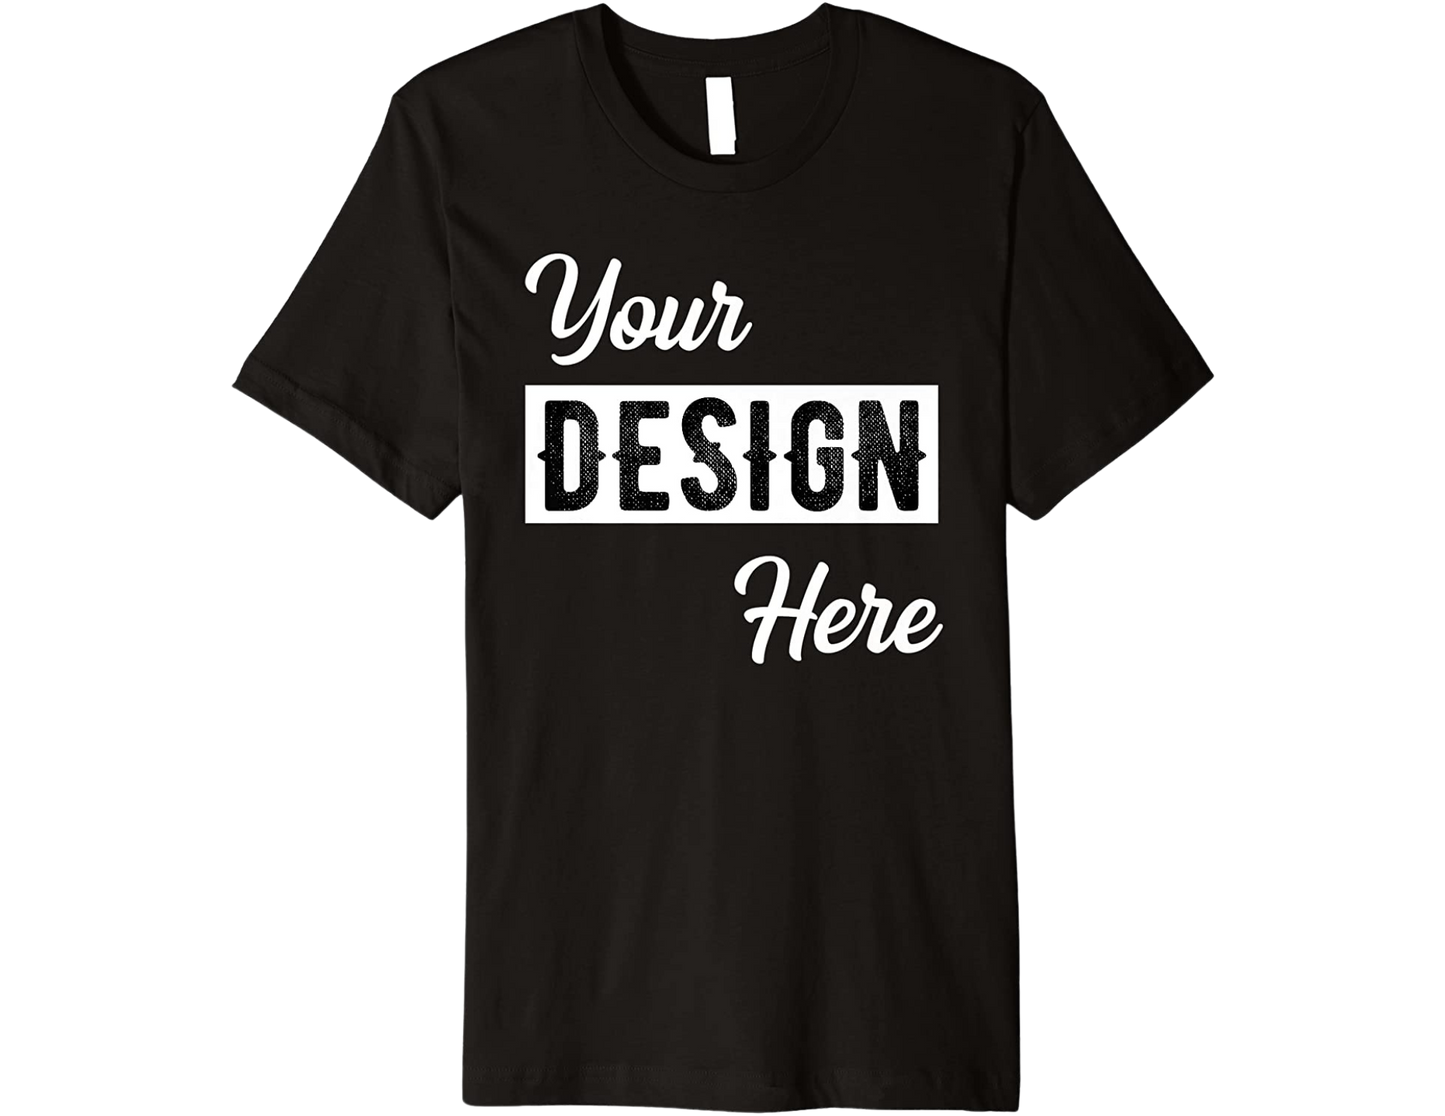 Custom T-Shirt With Your Logo or Design.